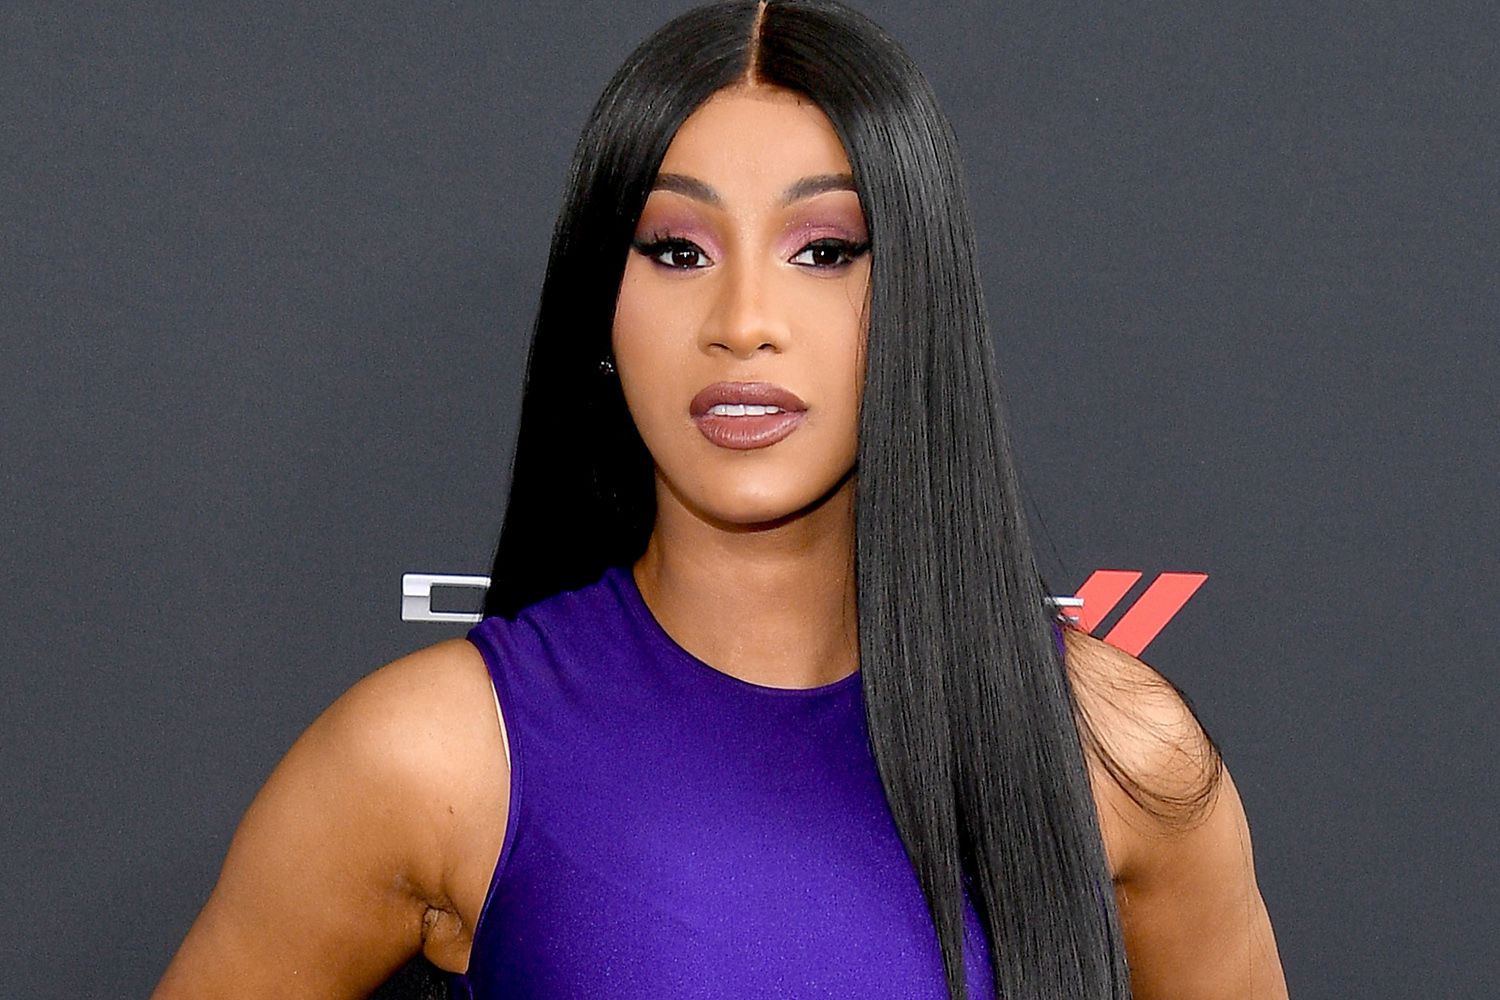 Cardi B Gets Her Face Inked in Video Shared